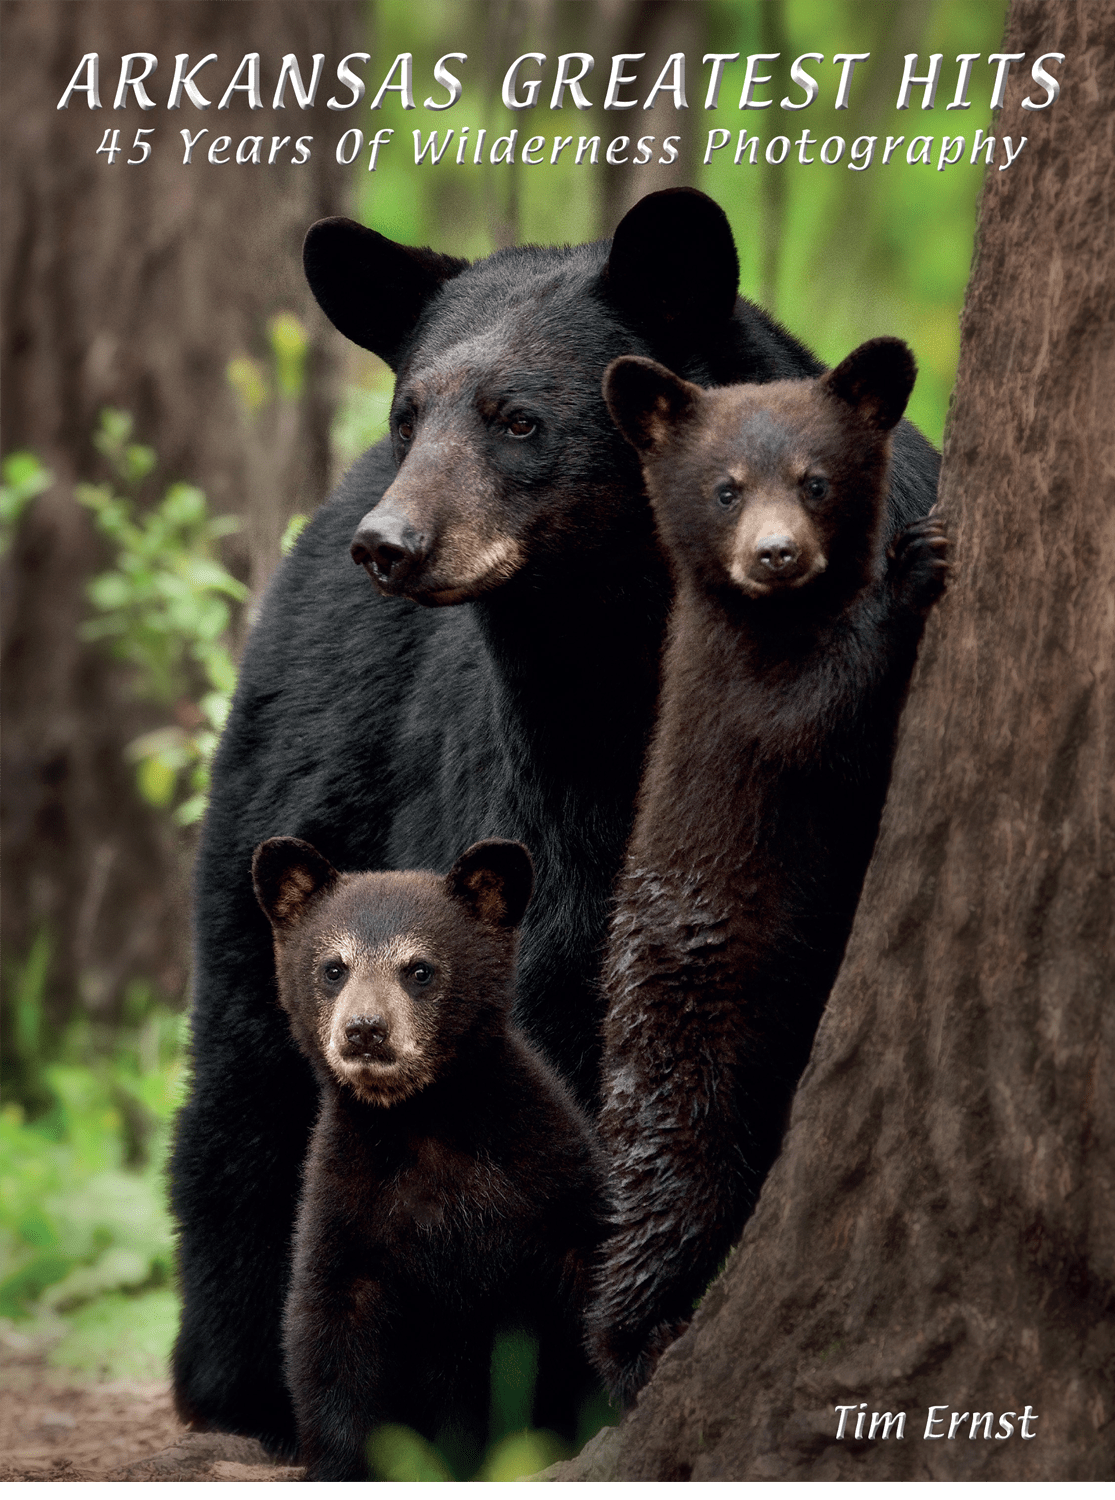 photo of 3 black bears on the cover of Tim Ernst's latest book